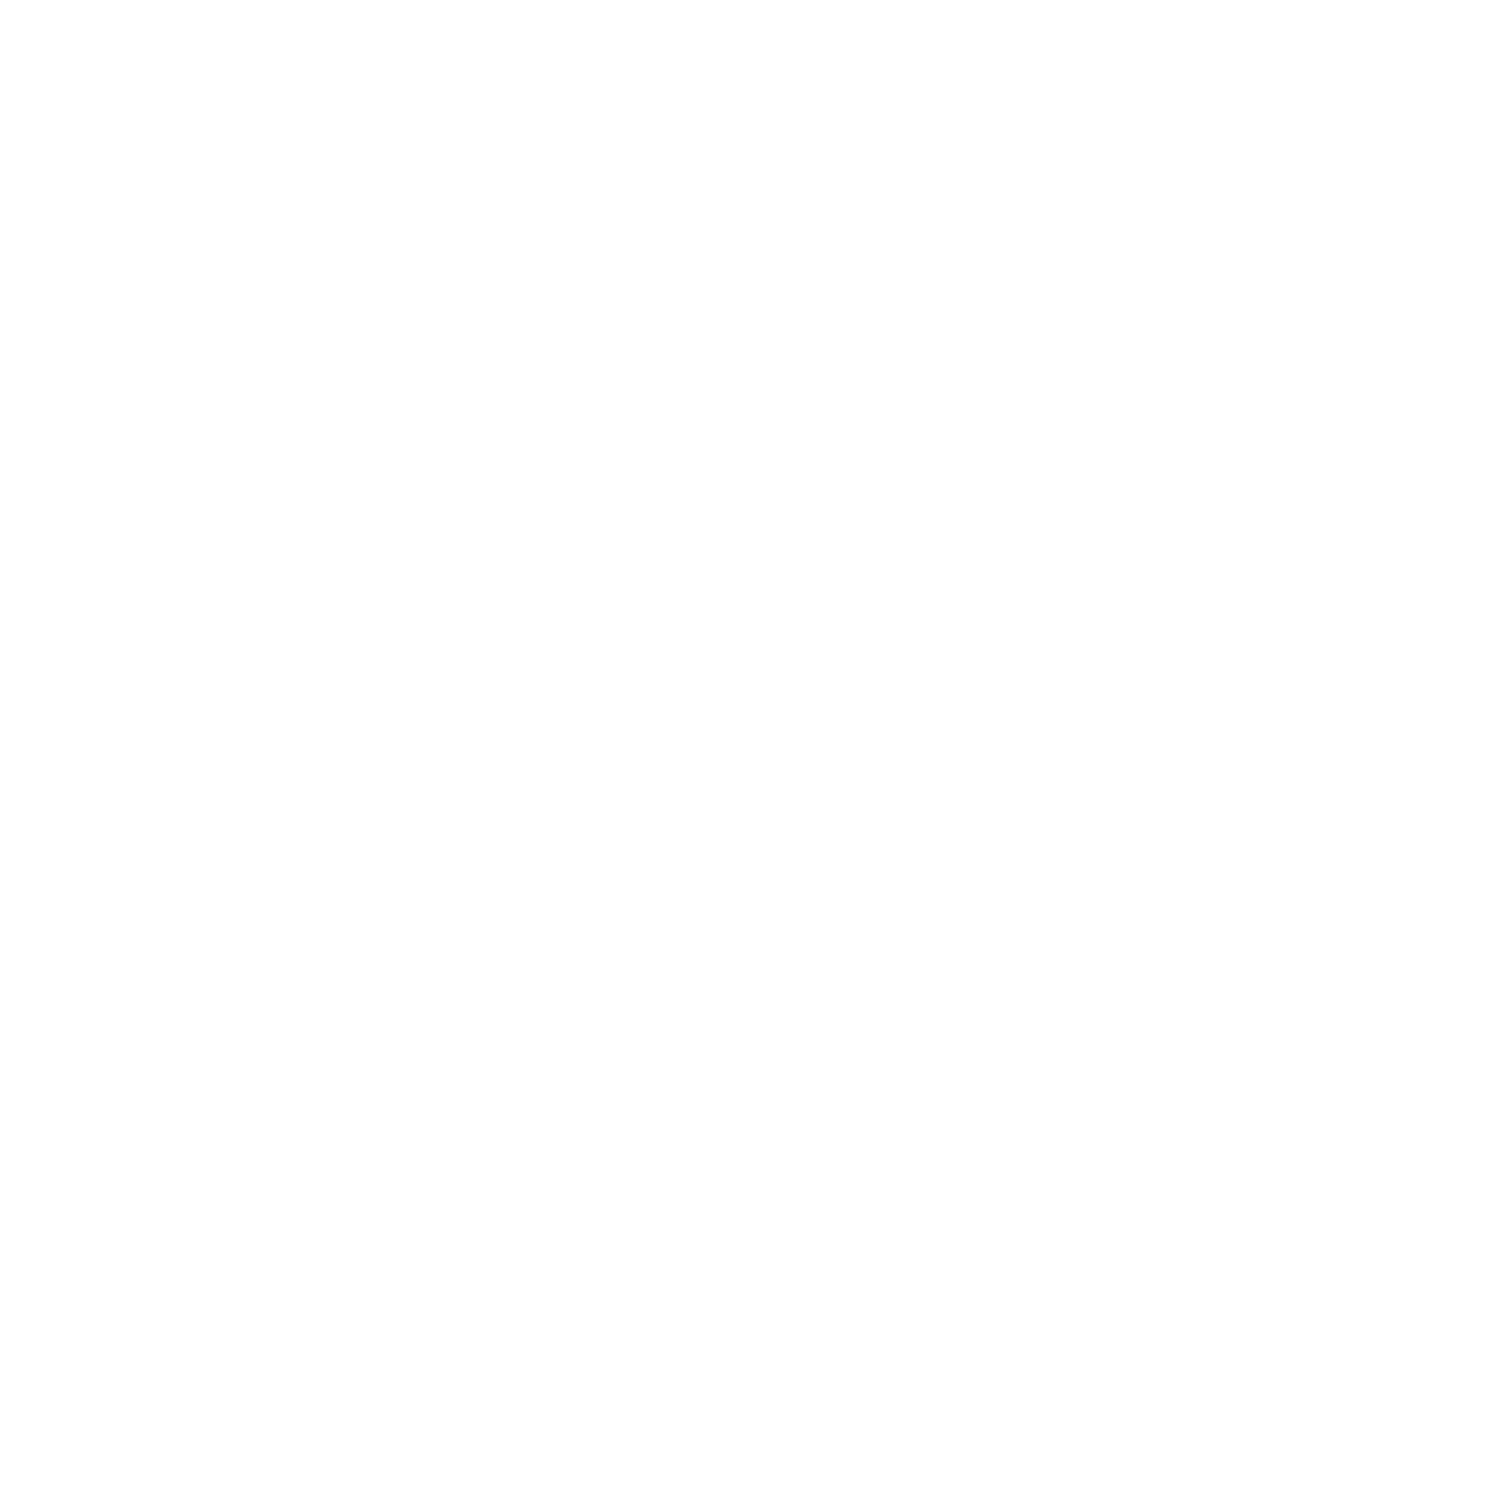 Project Elevation